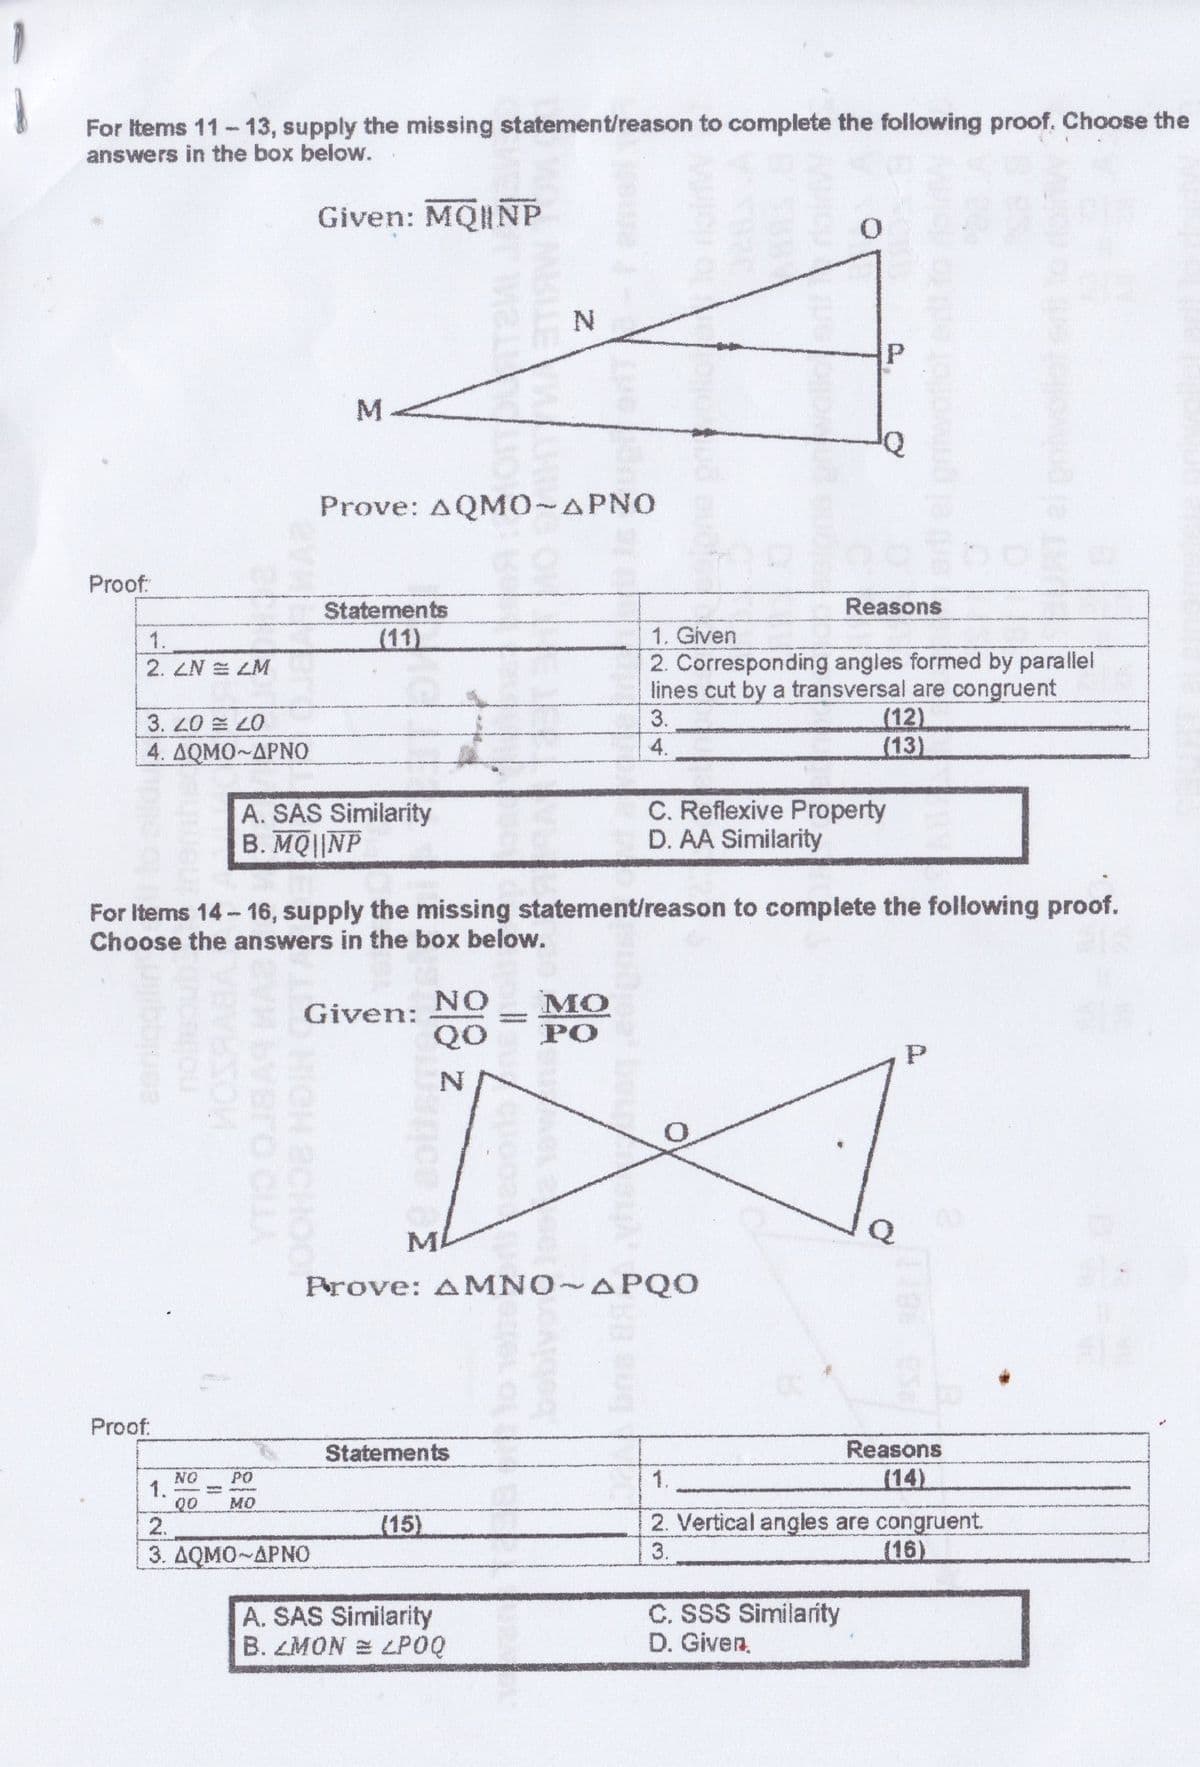 For Items 11-13, supply the missing statement/reason to complete the following proof. Choose the
answers in the box below.
Given: MQINP
Prove: AQMO~APNO
Proof:
Reasons
Statements
(11)
1.
1. Given
2. Corresponding angles formed by parallel
lines cut by a transversal are congruent
(12)
(13)
2. LN E LM
3.
3. 20
4. ΔΟΜΟ~ΔΡΝΟ
4.
A. SAS Similarity
B. MQ||NP
C. Reflexive Property
D. AA Similarity
For Items 14- 16, supply the missing statement/reason to complete the following proof.
Choose the answers in the box below.
NO
Given:
QO
PO
MA
Prove: AMNO APQO
Proof:
Statements
Reasons
PO
1.
(14)
NO
1.
00
2.
MO
2. Vertical angles are congruent.
(16)
(15)
3. ΔΟΜΟ~ΔΡΝΟ
3.
A. SAS Similarity
B. LMON E LPOQ
C. SSS Similarity
D. Given,
aeniggiin
bra BR
